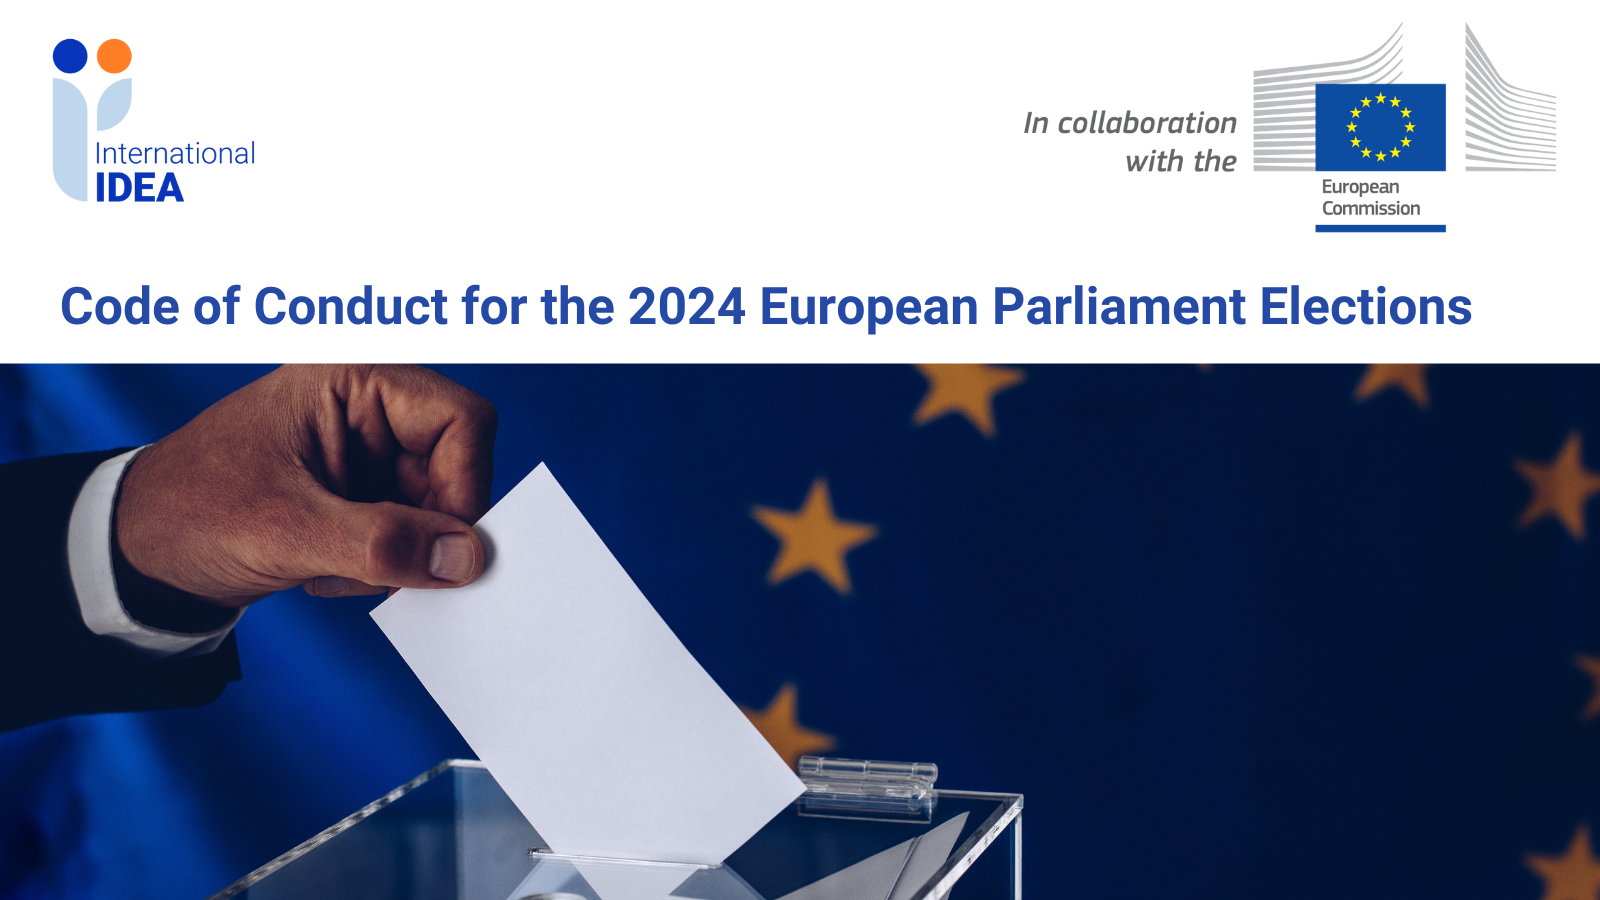 Code of Conduct for the 2024 European Parliament Elections image.